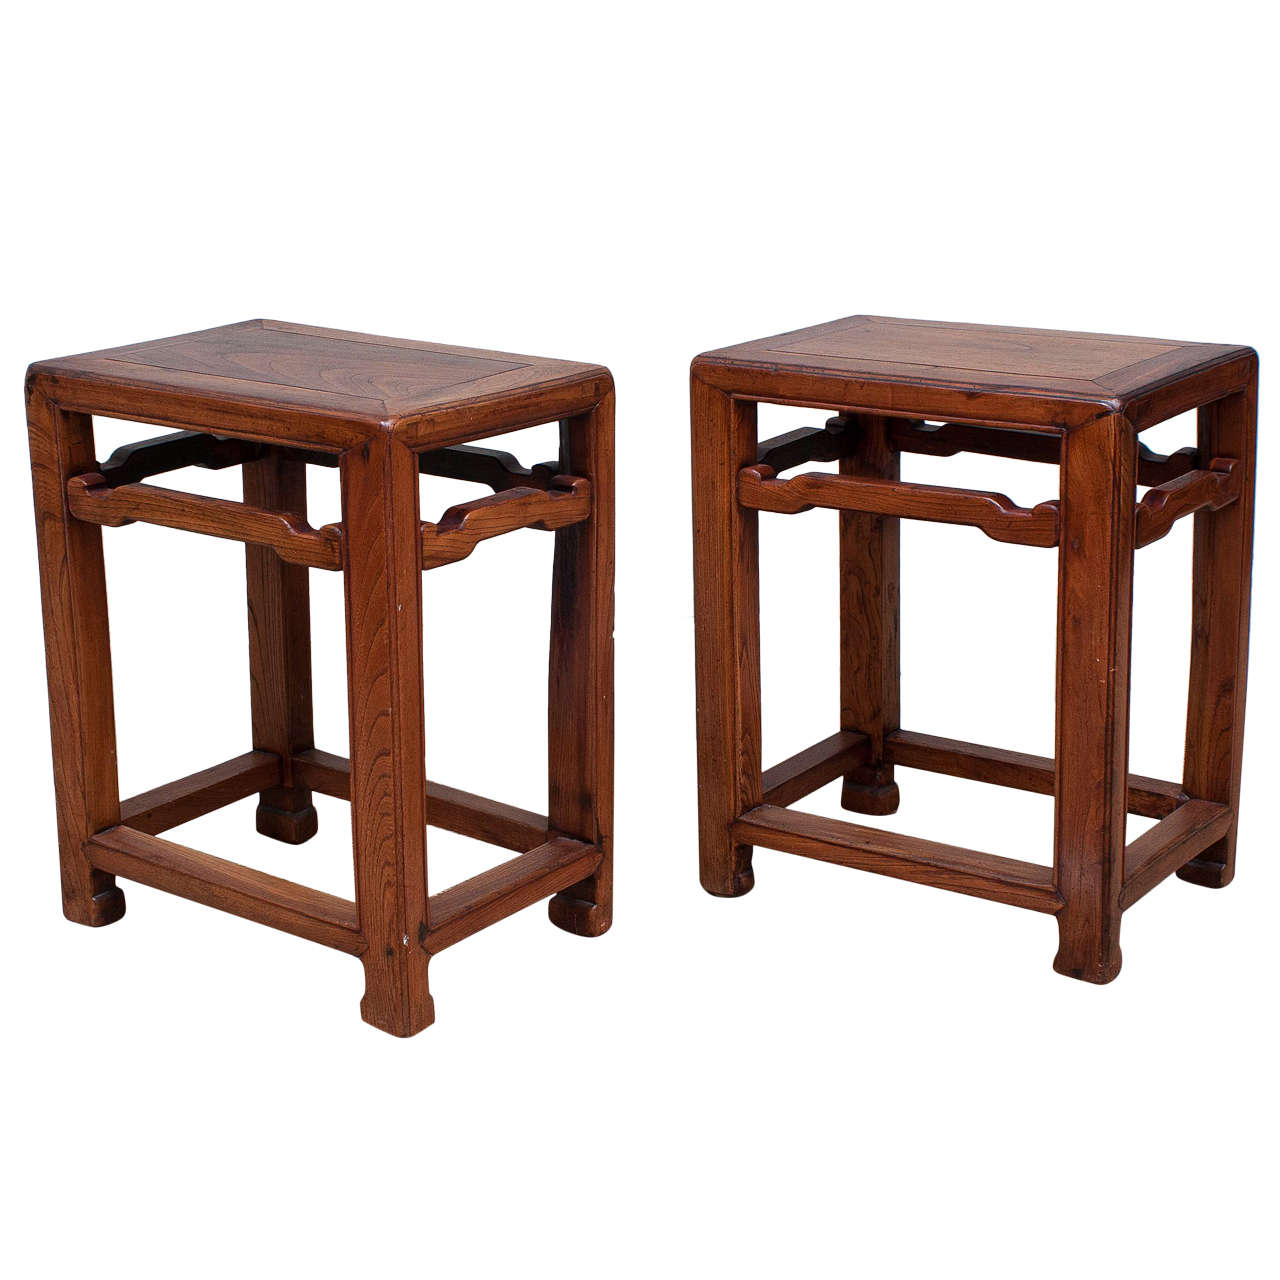 Pair of Chinese Low Tables, 19th Century